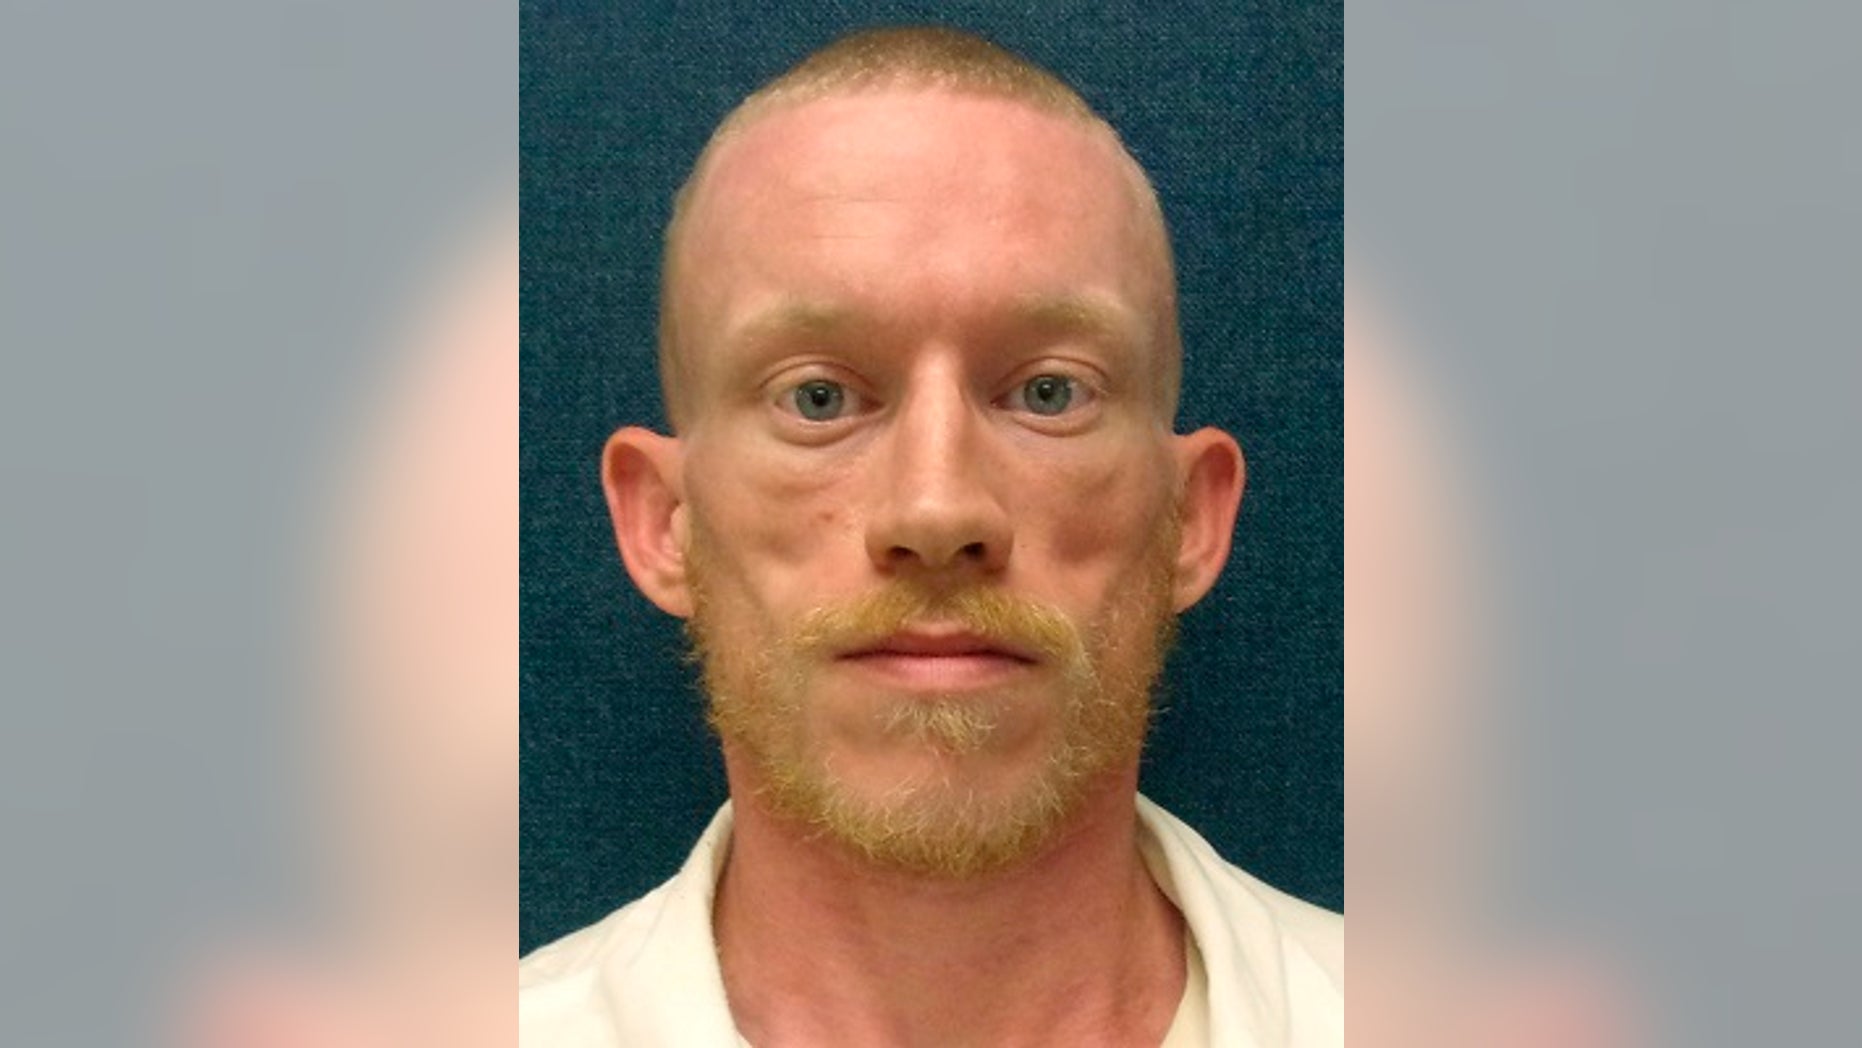 Alabama inmate captured days after escaping prison: officials